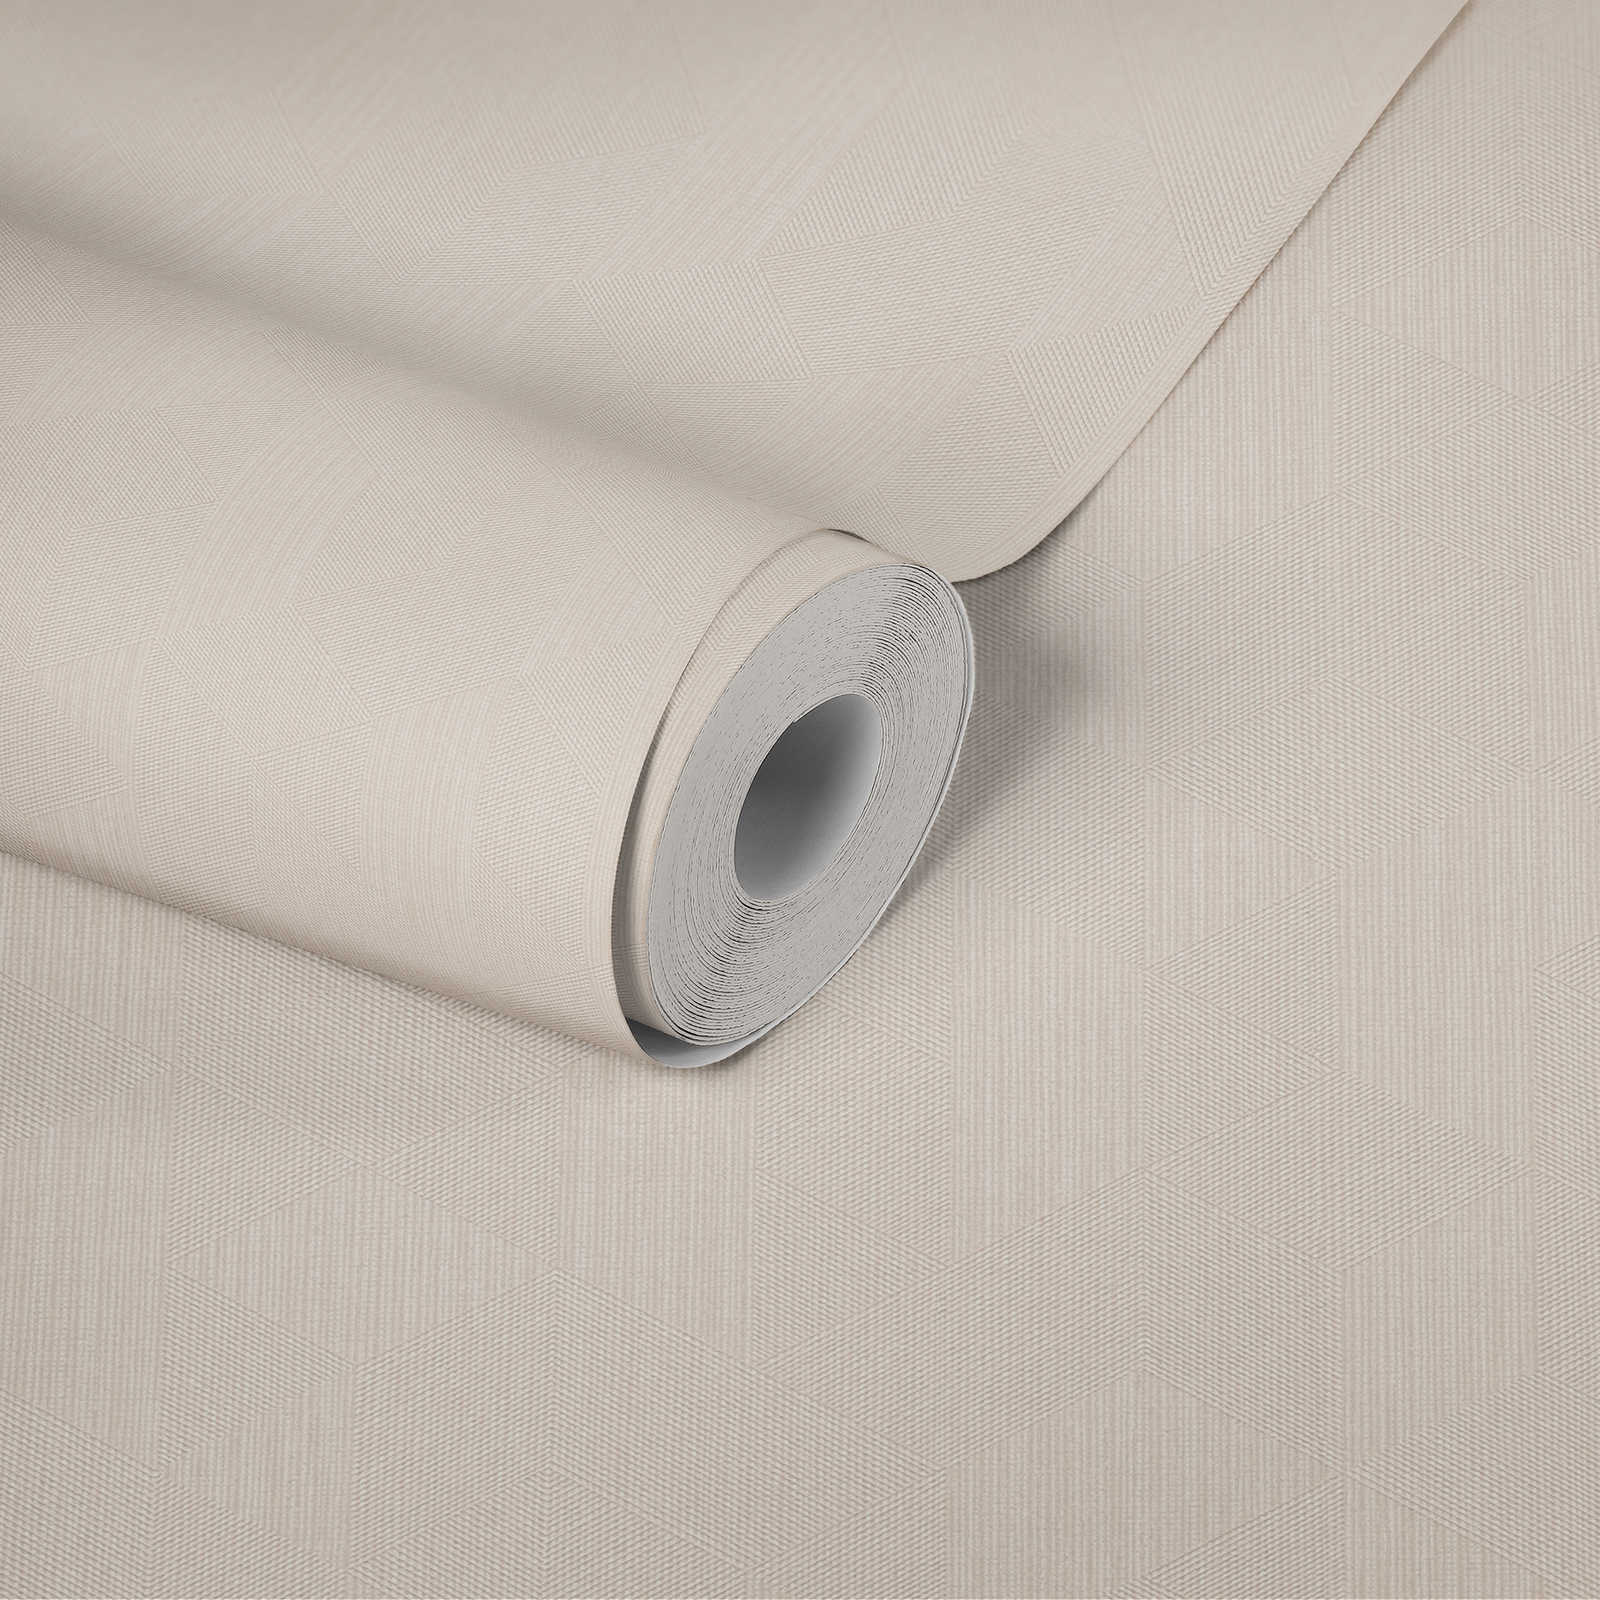             Light beige wallpaper non-woven with graphic pattern & shimmer effect - beige
        